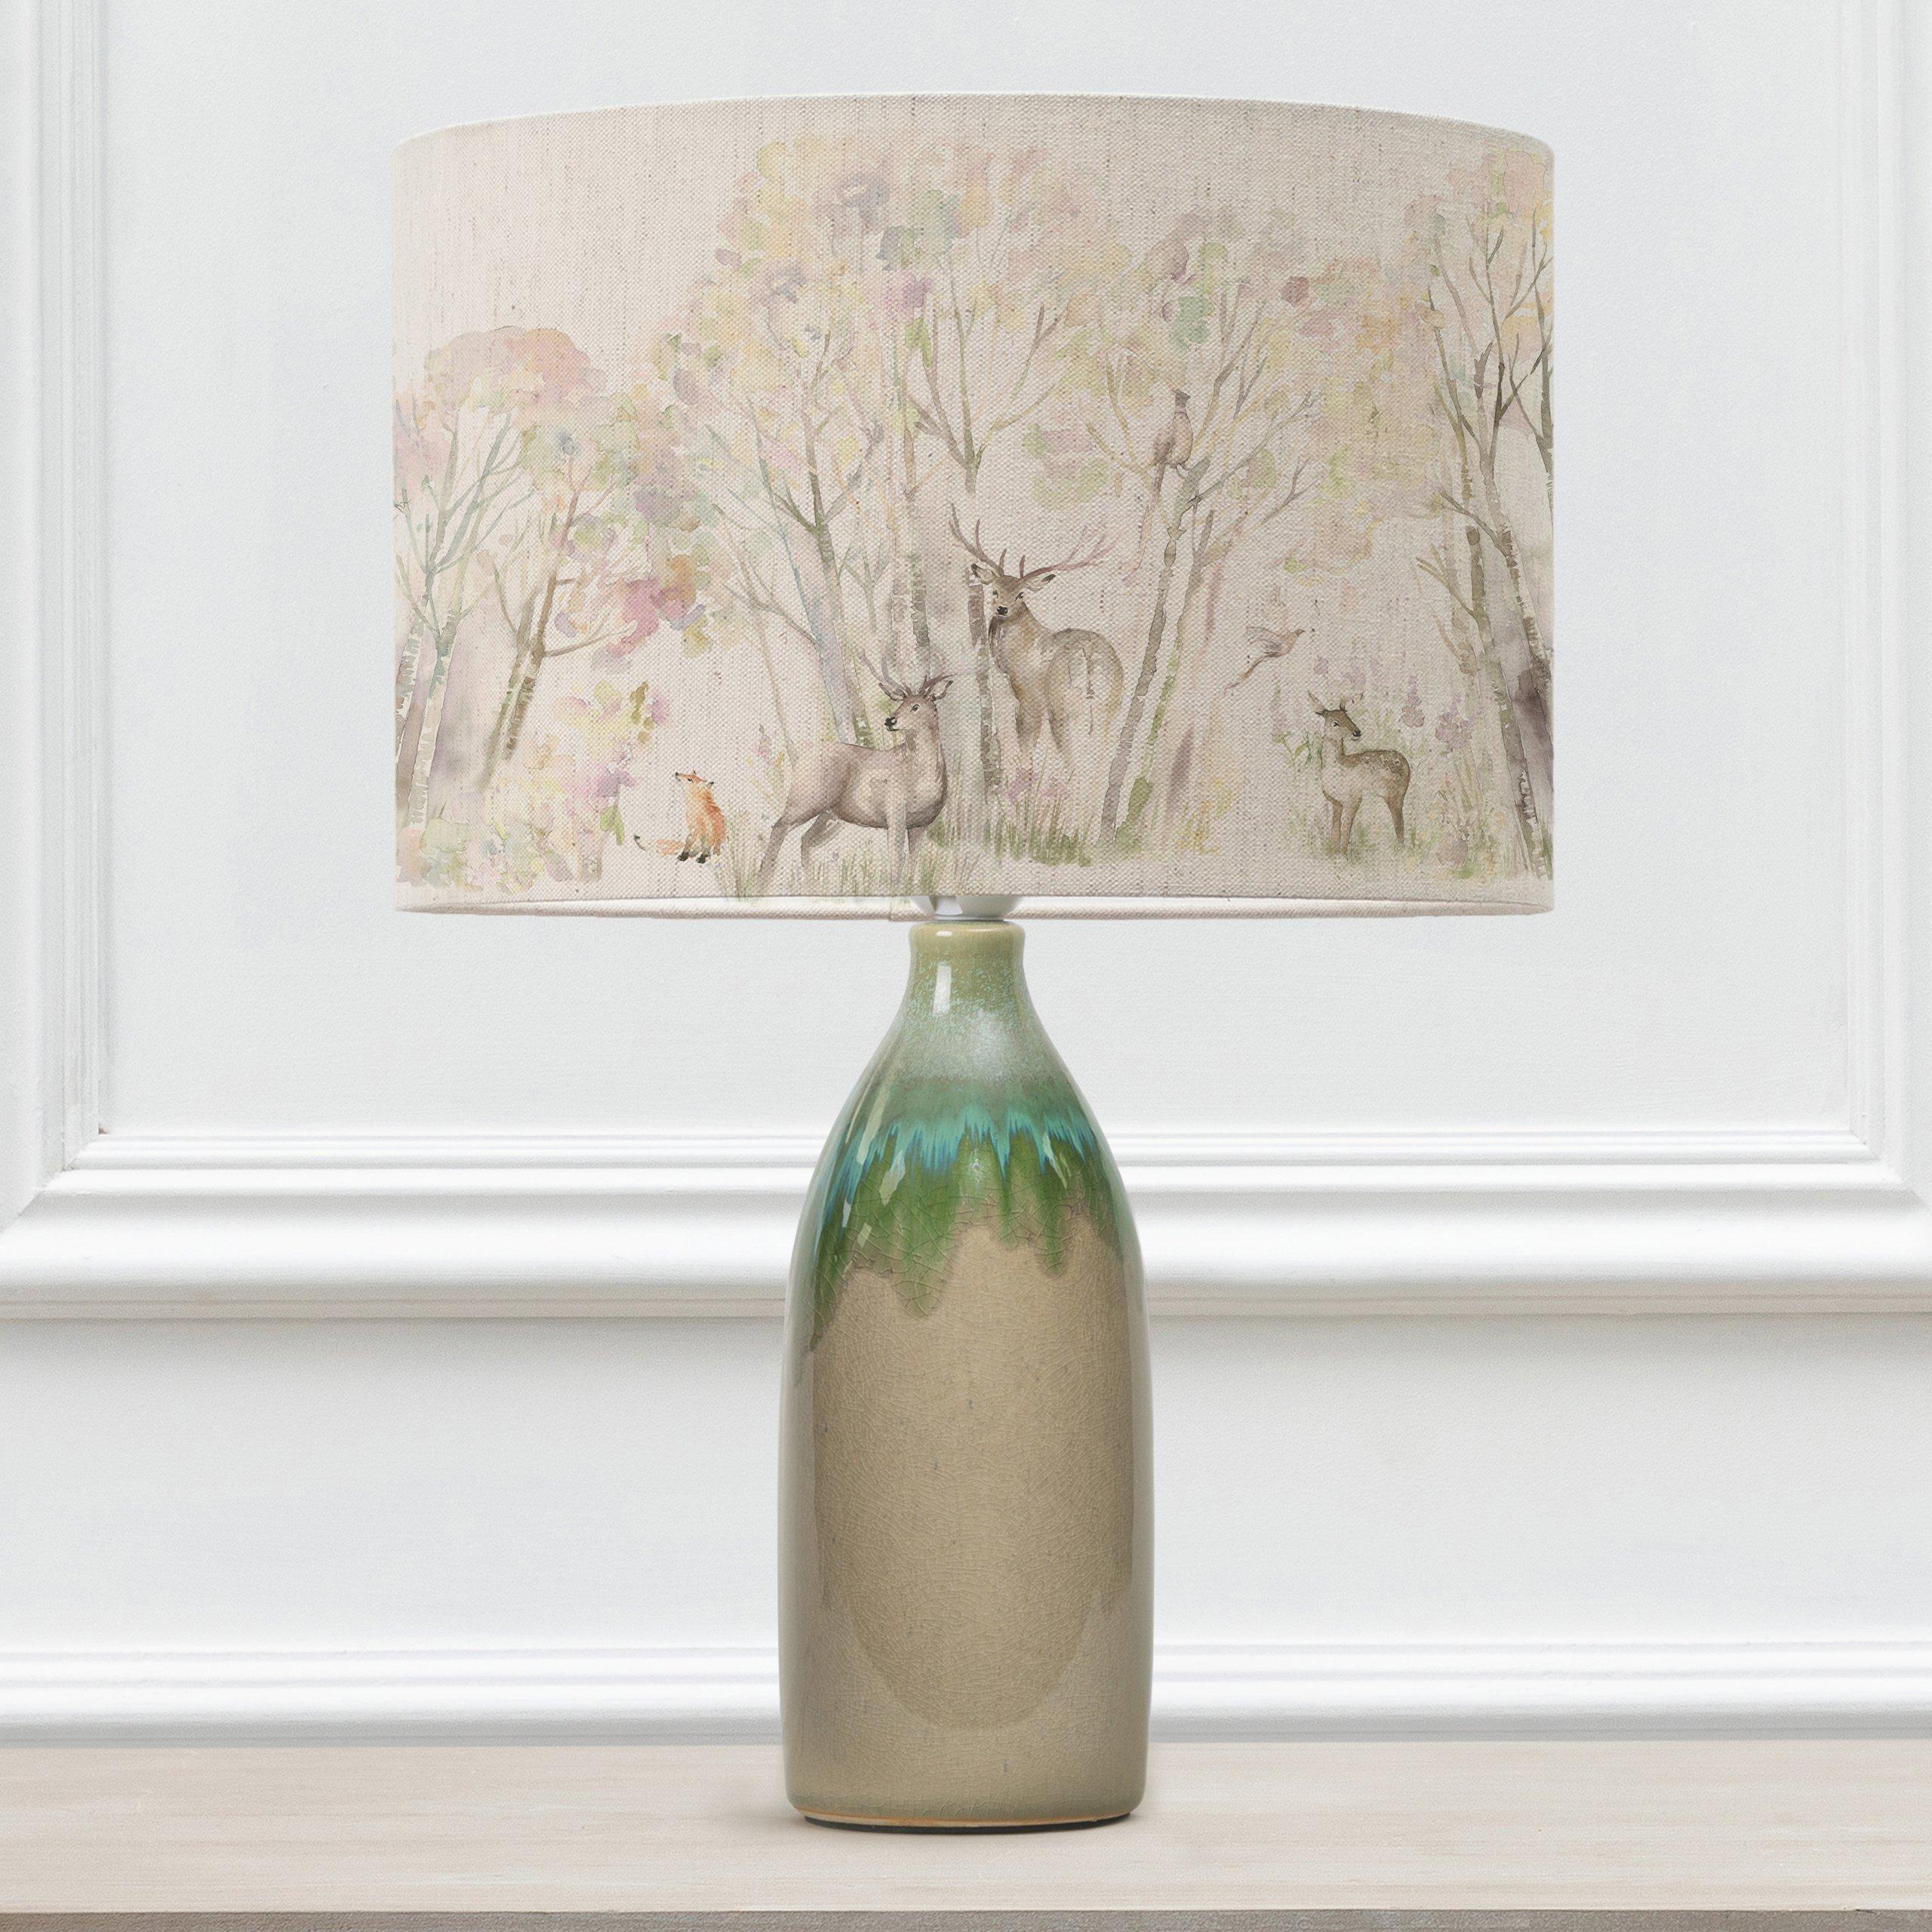 Narvi Lamp With Enchanted Forest Eva Lampshade